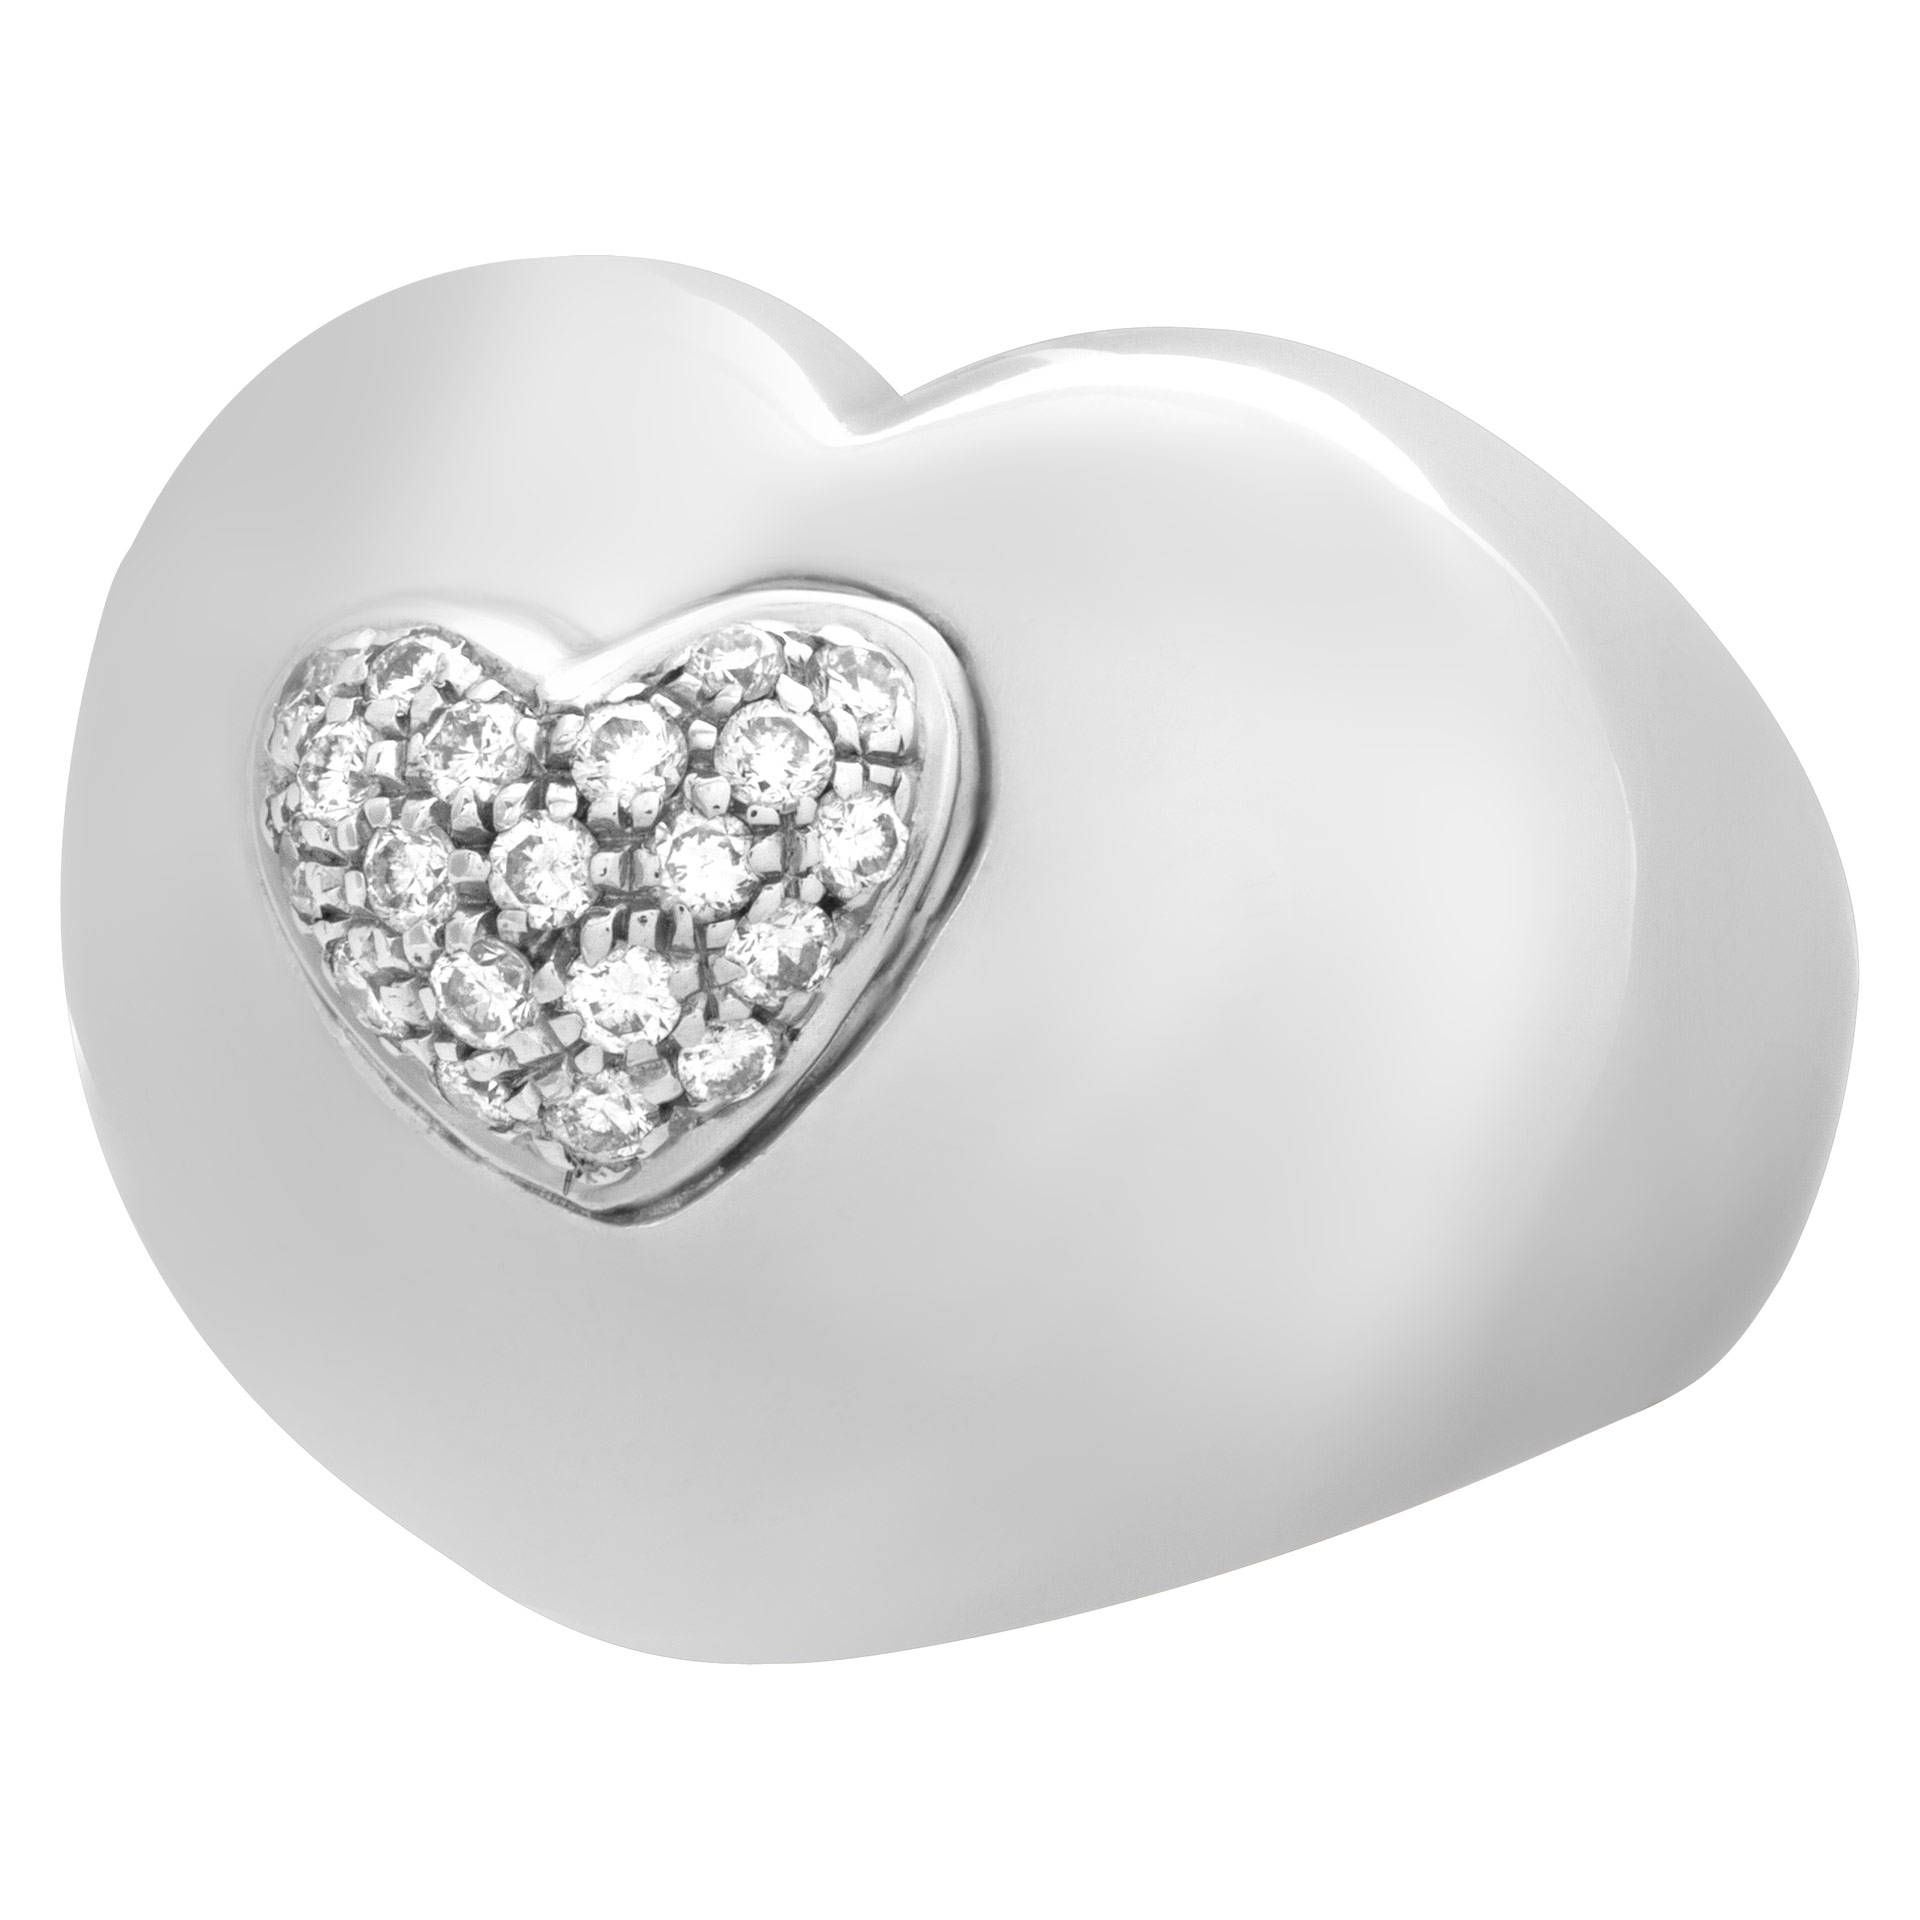 Pave diamond heart shaped ring in 18k white gold. Size 7 image 1